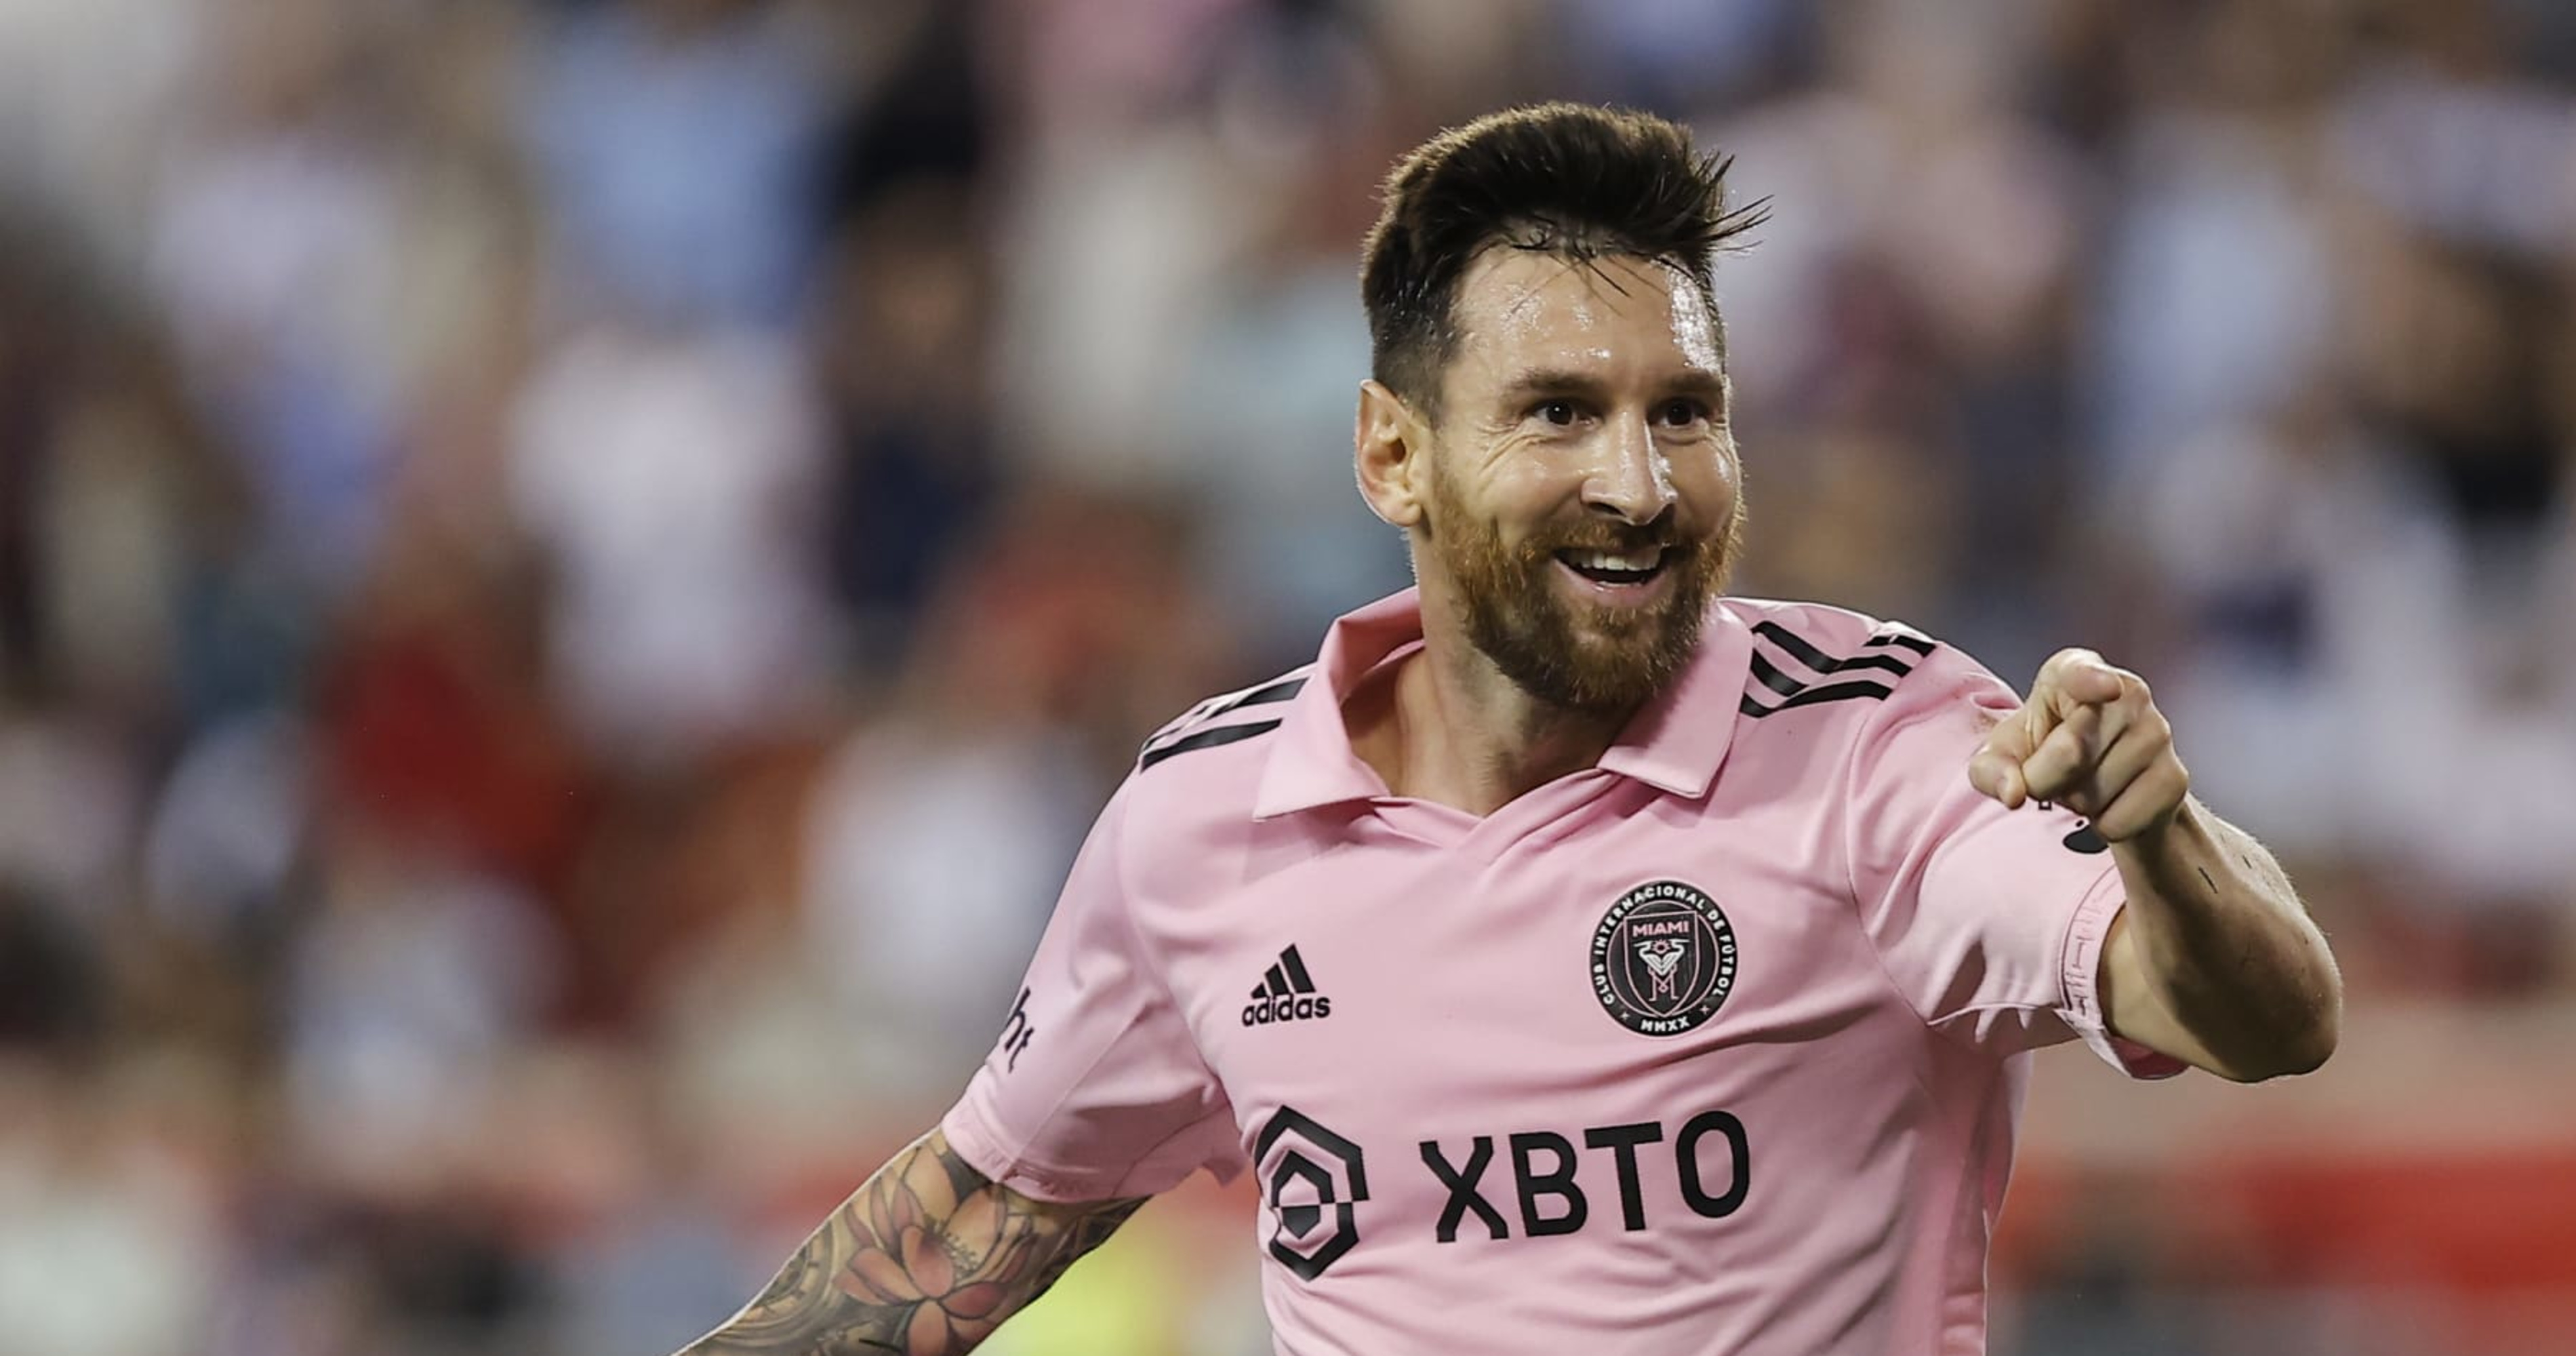 Lionel Messi: Inter Miami star exits match against Toronto FC with